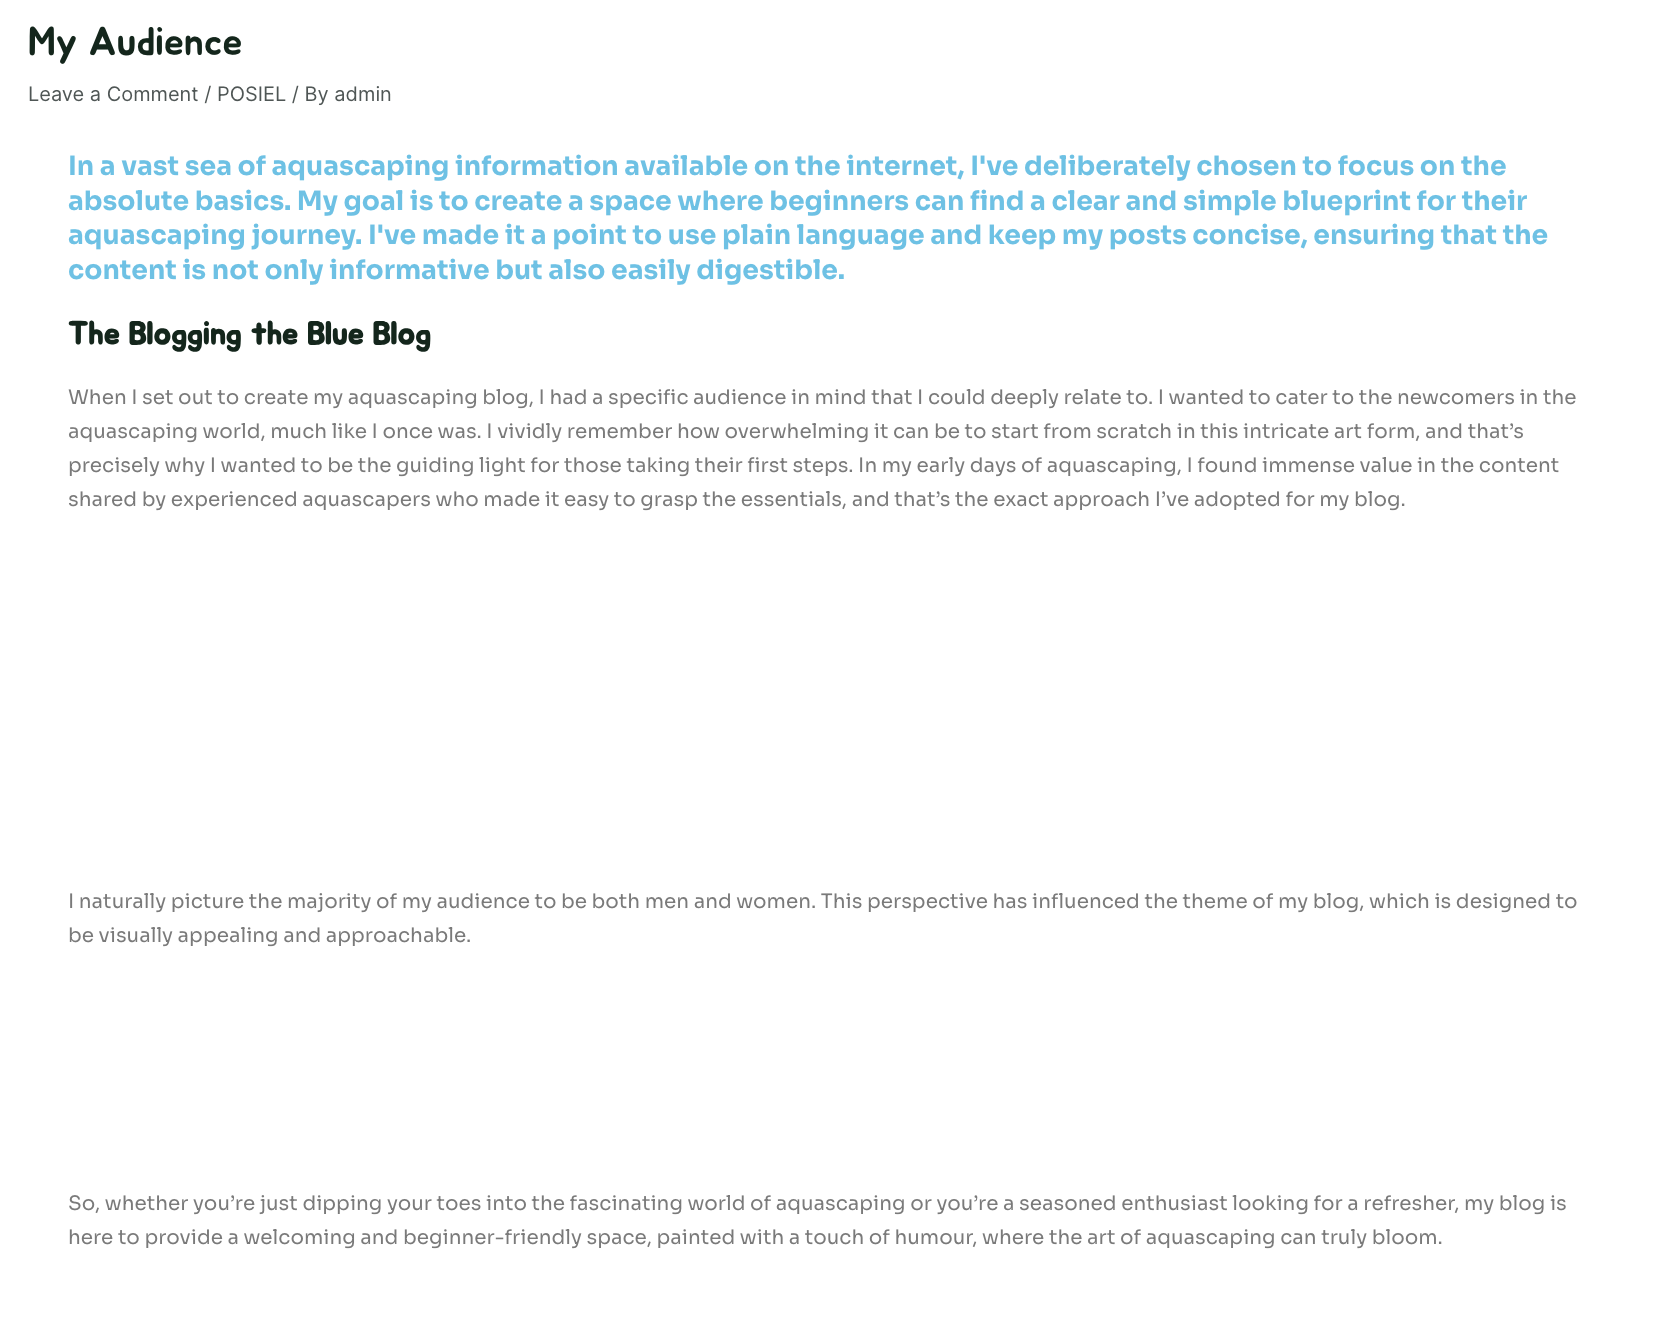 screenshot of process post 1 from the website showing lots of unsed whitespace between paragraphs